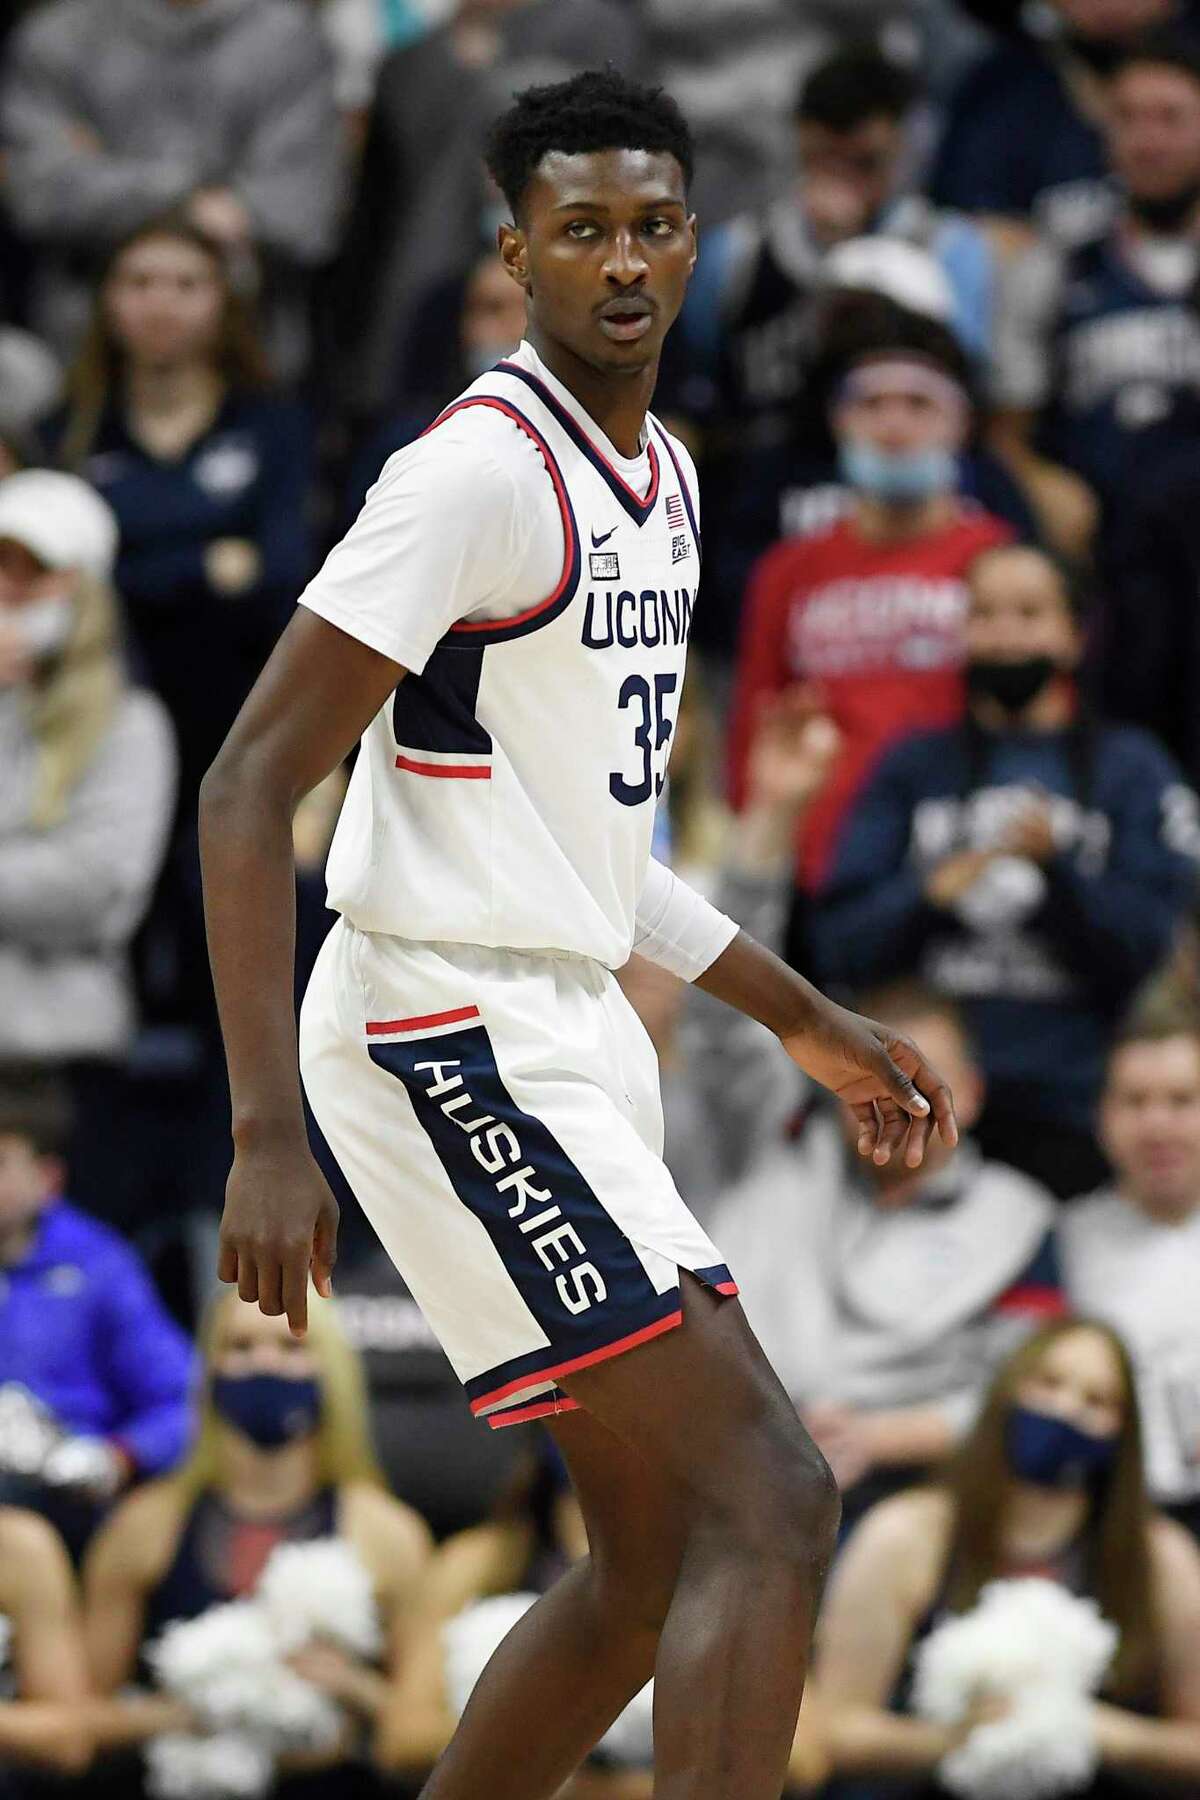 Connecticut's Samson Johnson in the second half of an NCAA college basketball game, Saturday, Dec. 4, 2021, in Storrs, Conn. (AP Photo/Jessica Hill)